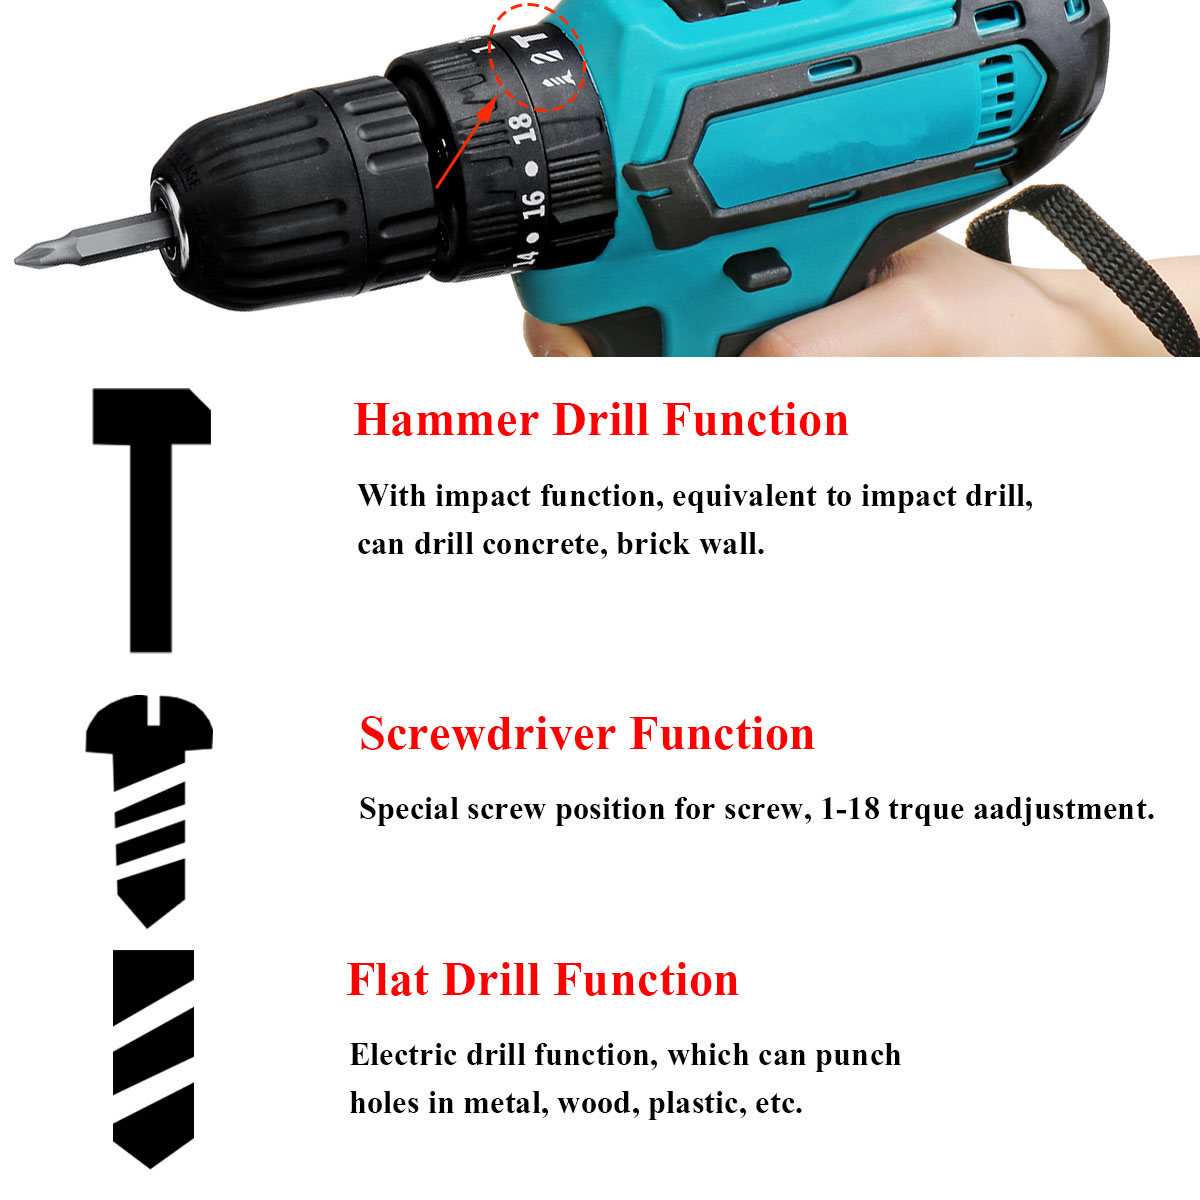 88VF-Cordless-Drill-3-IN-1-Electric-Screwdriver-Hammer-Impact-Drill-7500mAh-2-Speed-1787578-3